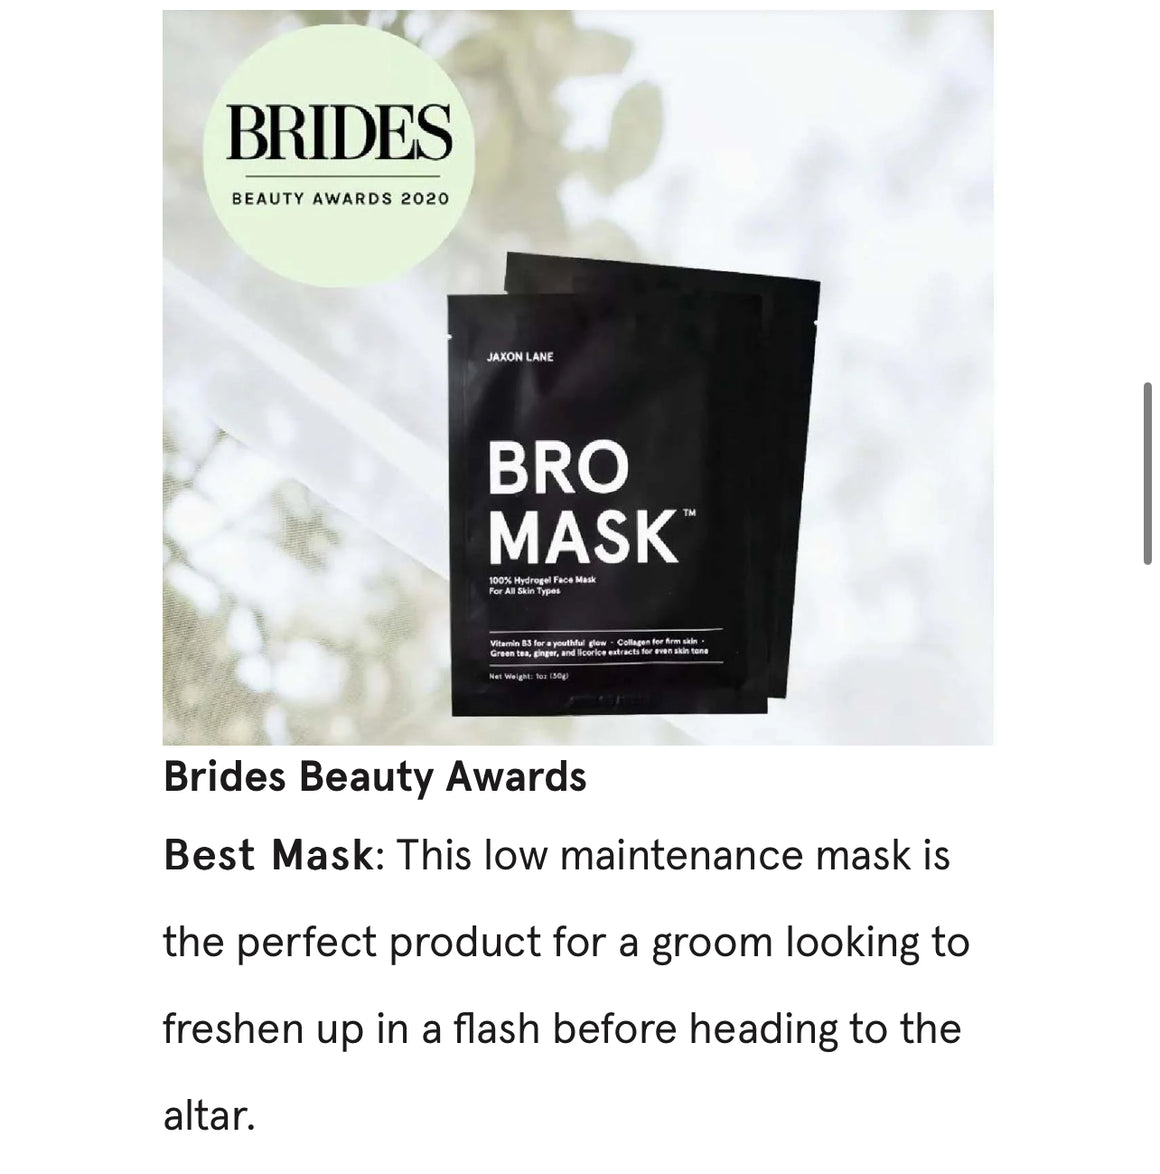 LUXURY FACE MASKS - BRO MASK COOLING EYE GELS WITH BAKUCHIOL